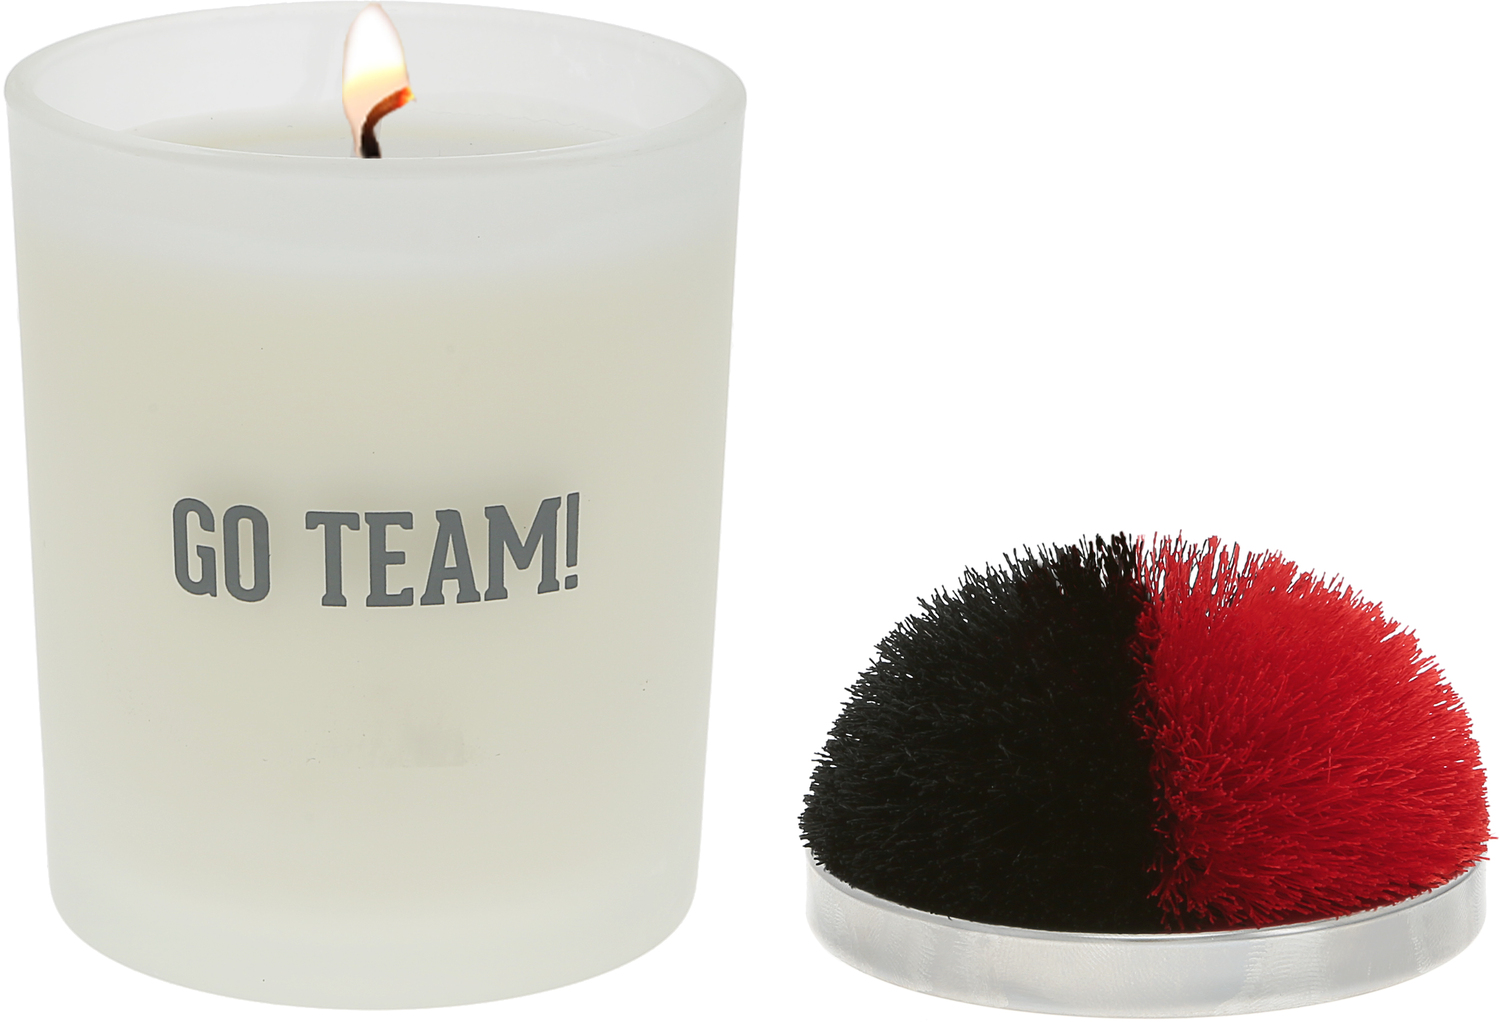 Go Team! - Red & Black by Repre-Scent - Go Team! - Red & Black - 5.5 oz - 100% Soy Wax Candle with Pom Pom Lid
Scent: Tranquility